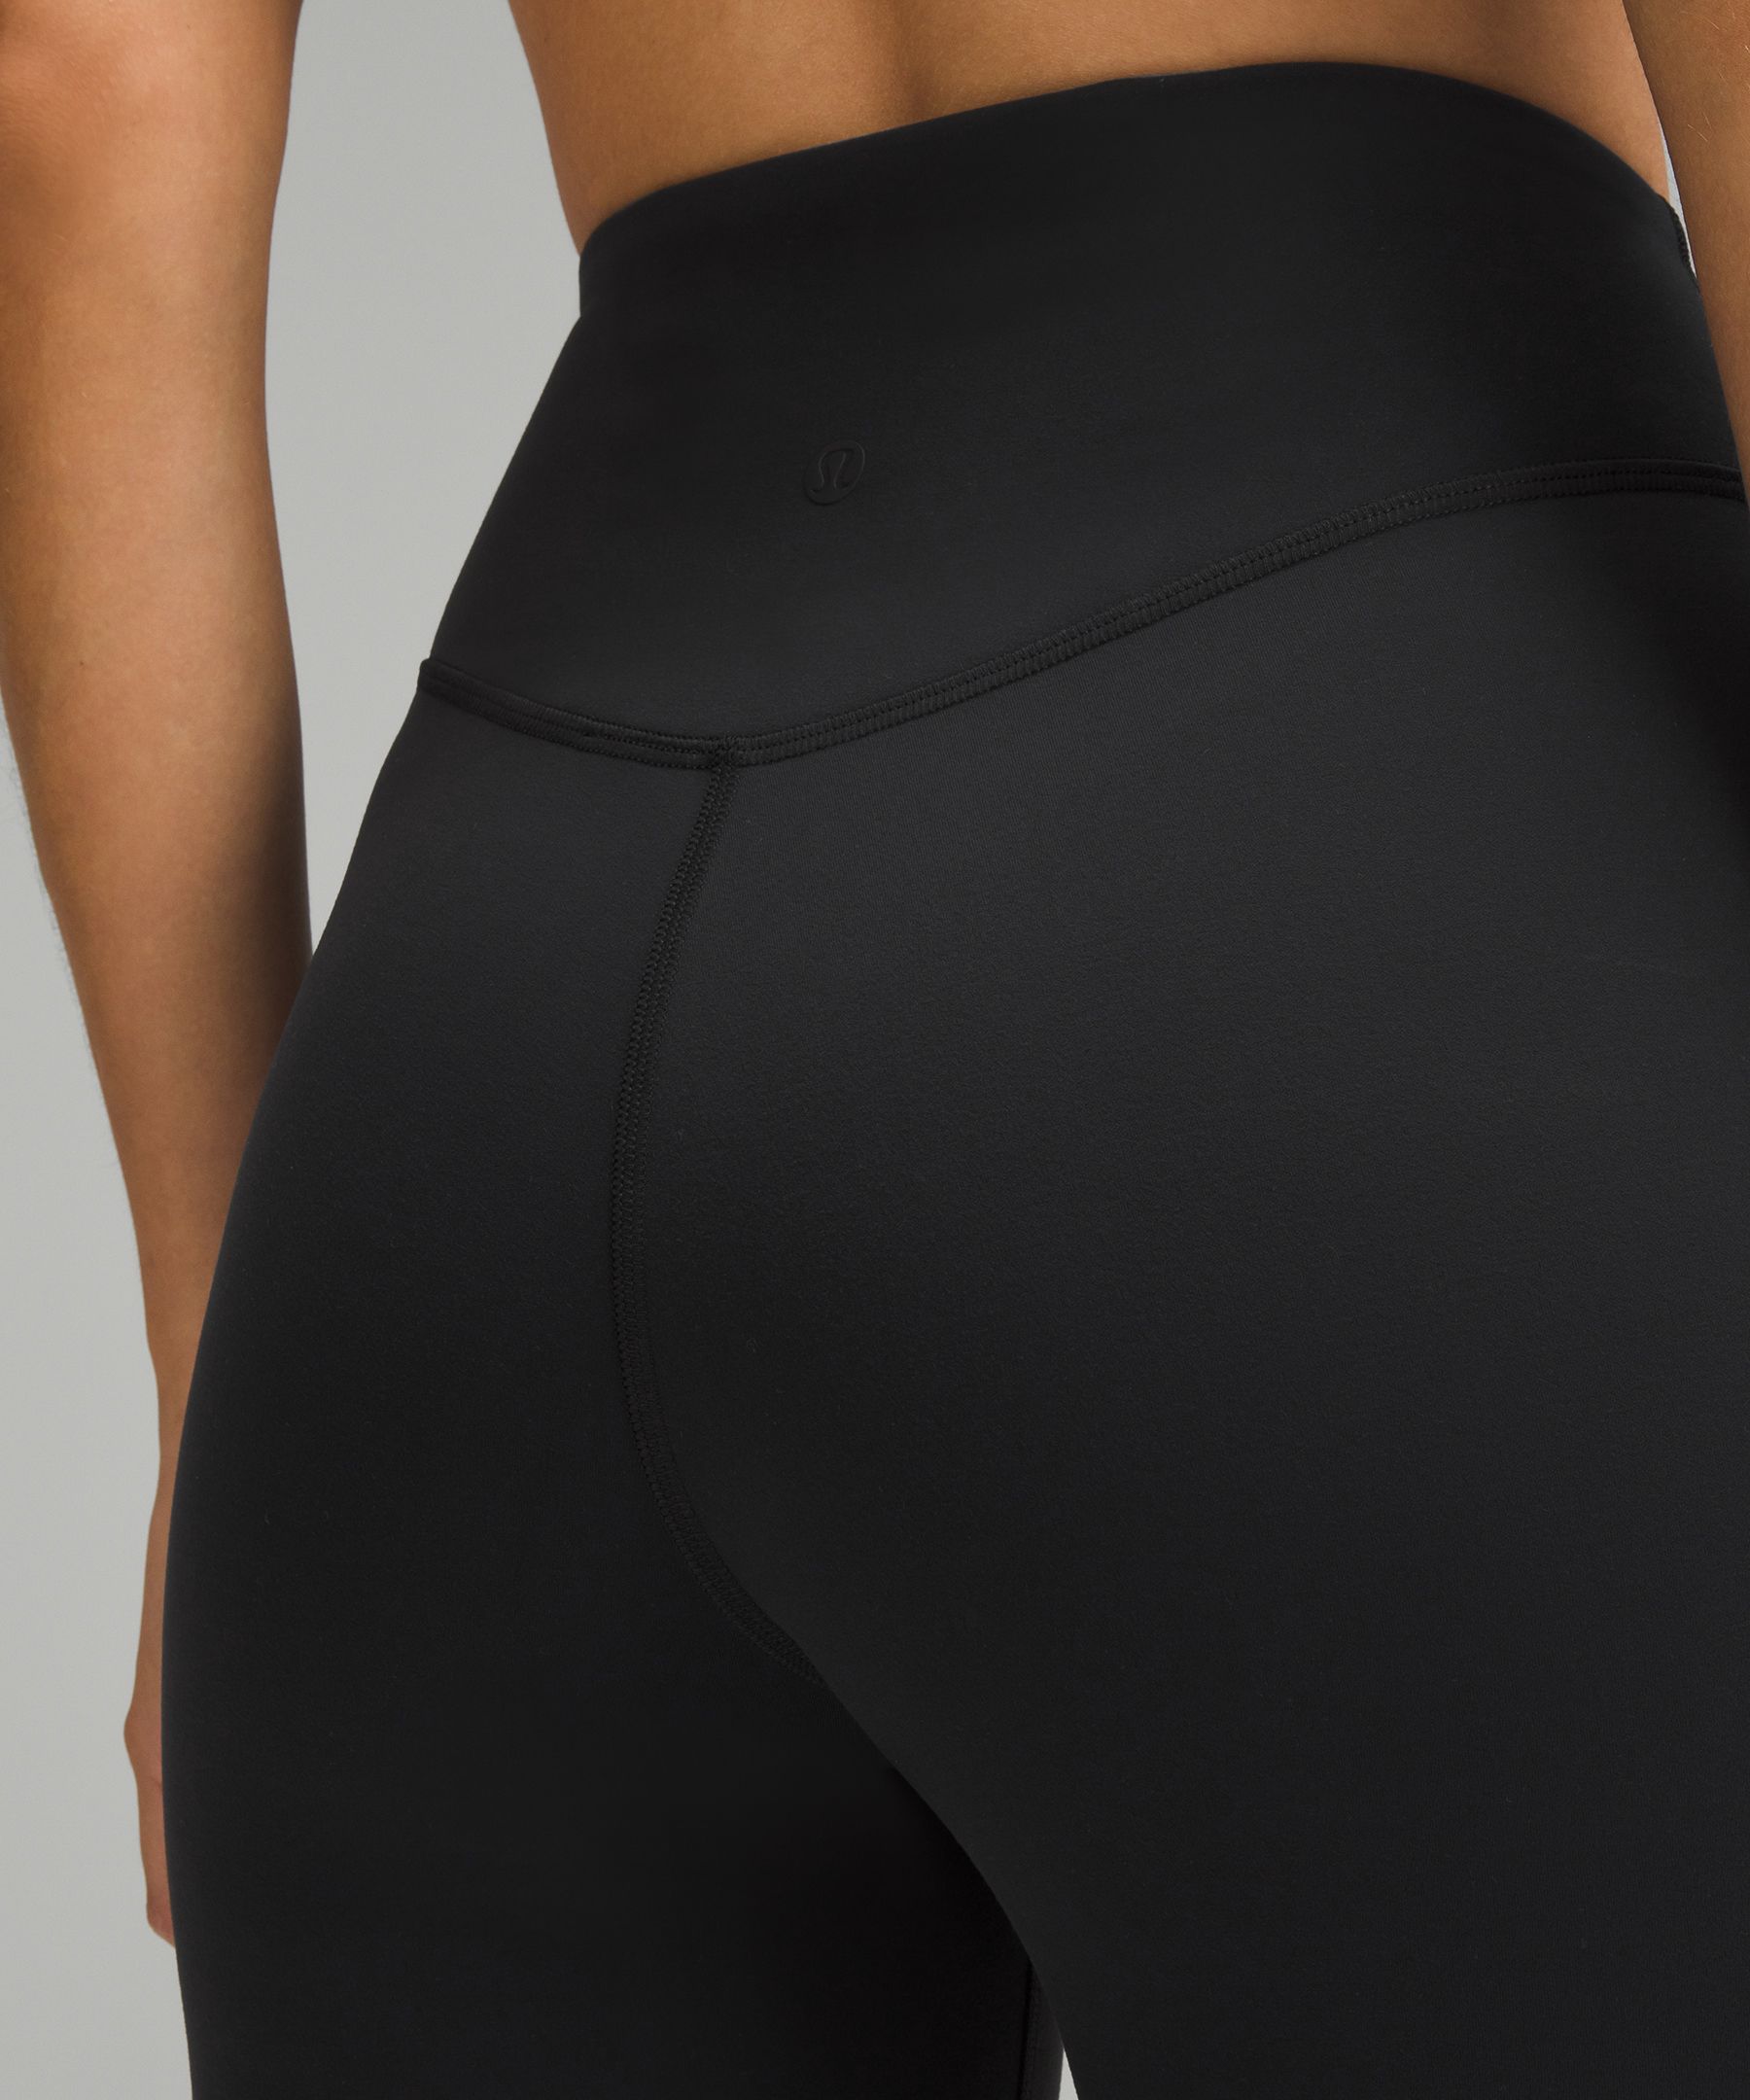 Lululemon Speed Wunder Tight Reflective Black Size 0 - $45 (55% Off Retail)  - From Liya